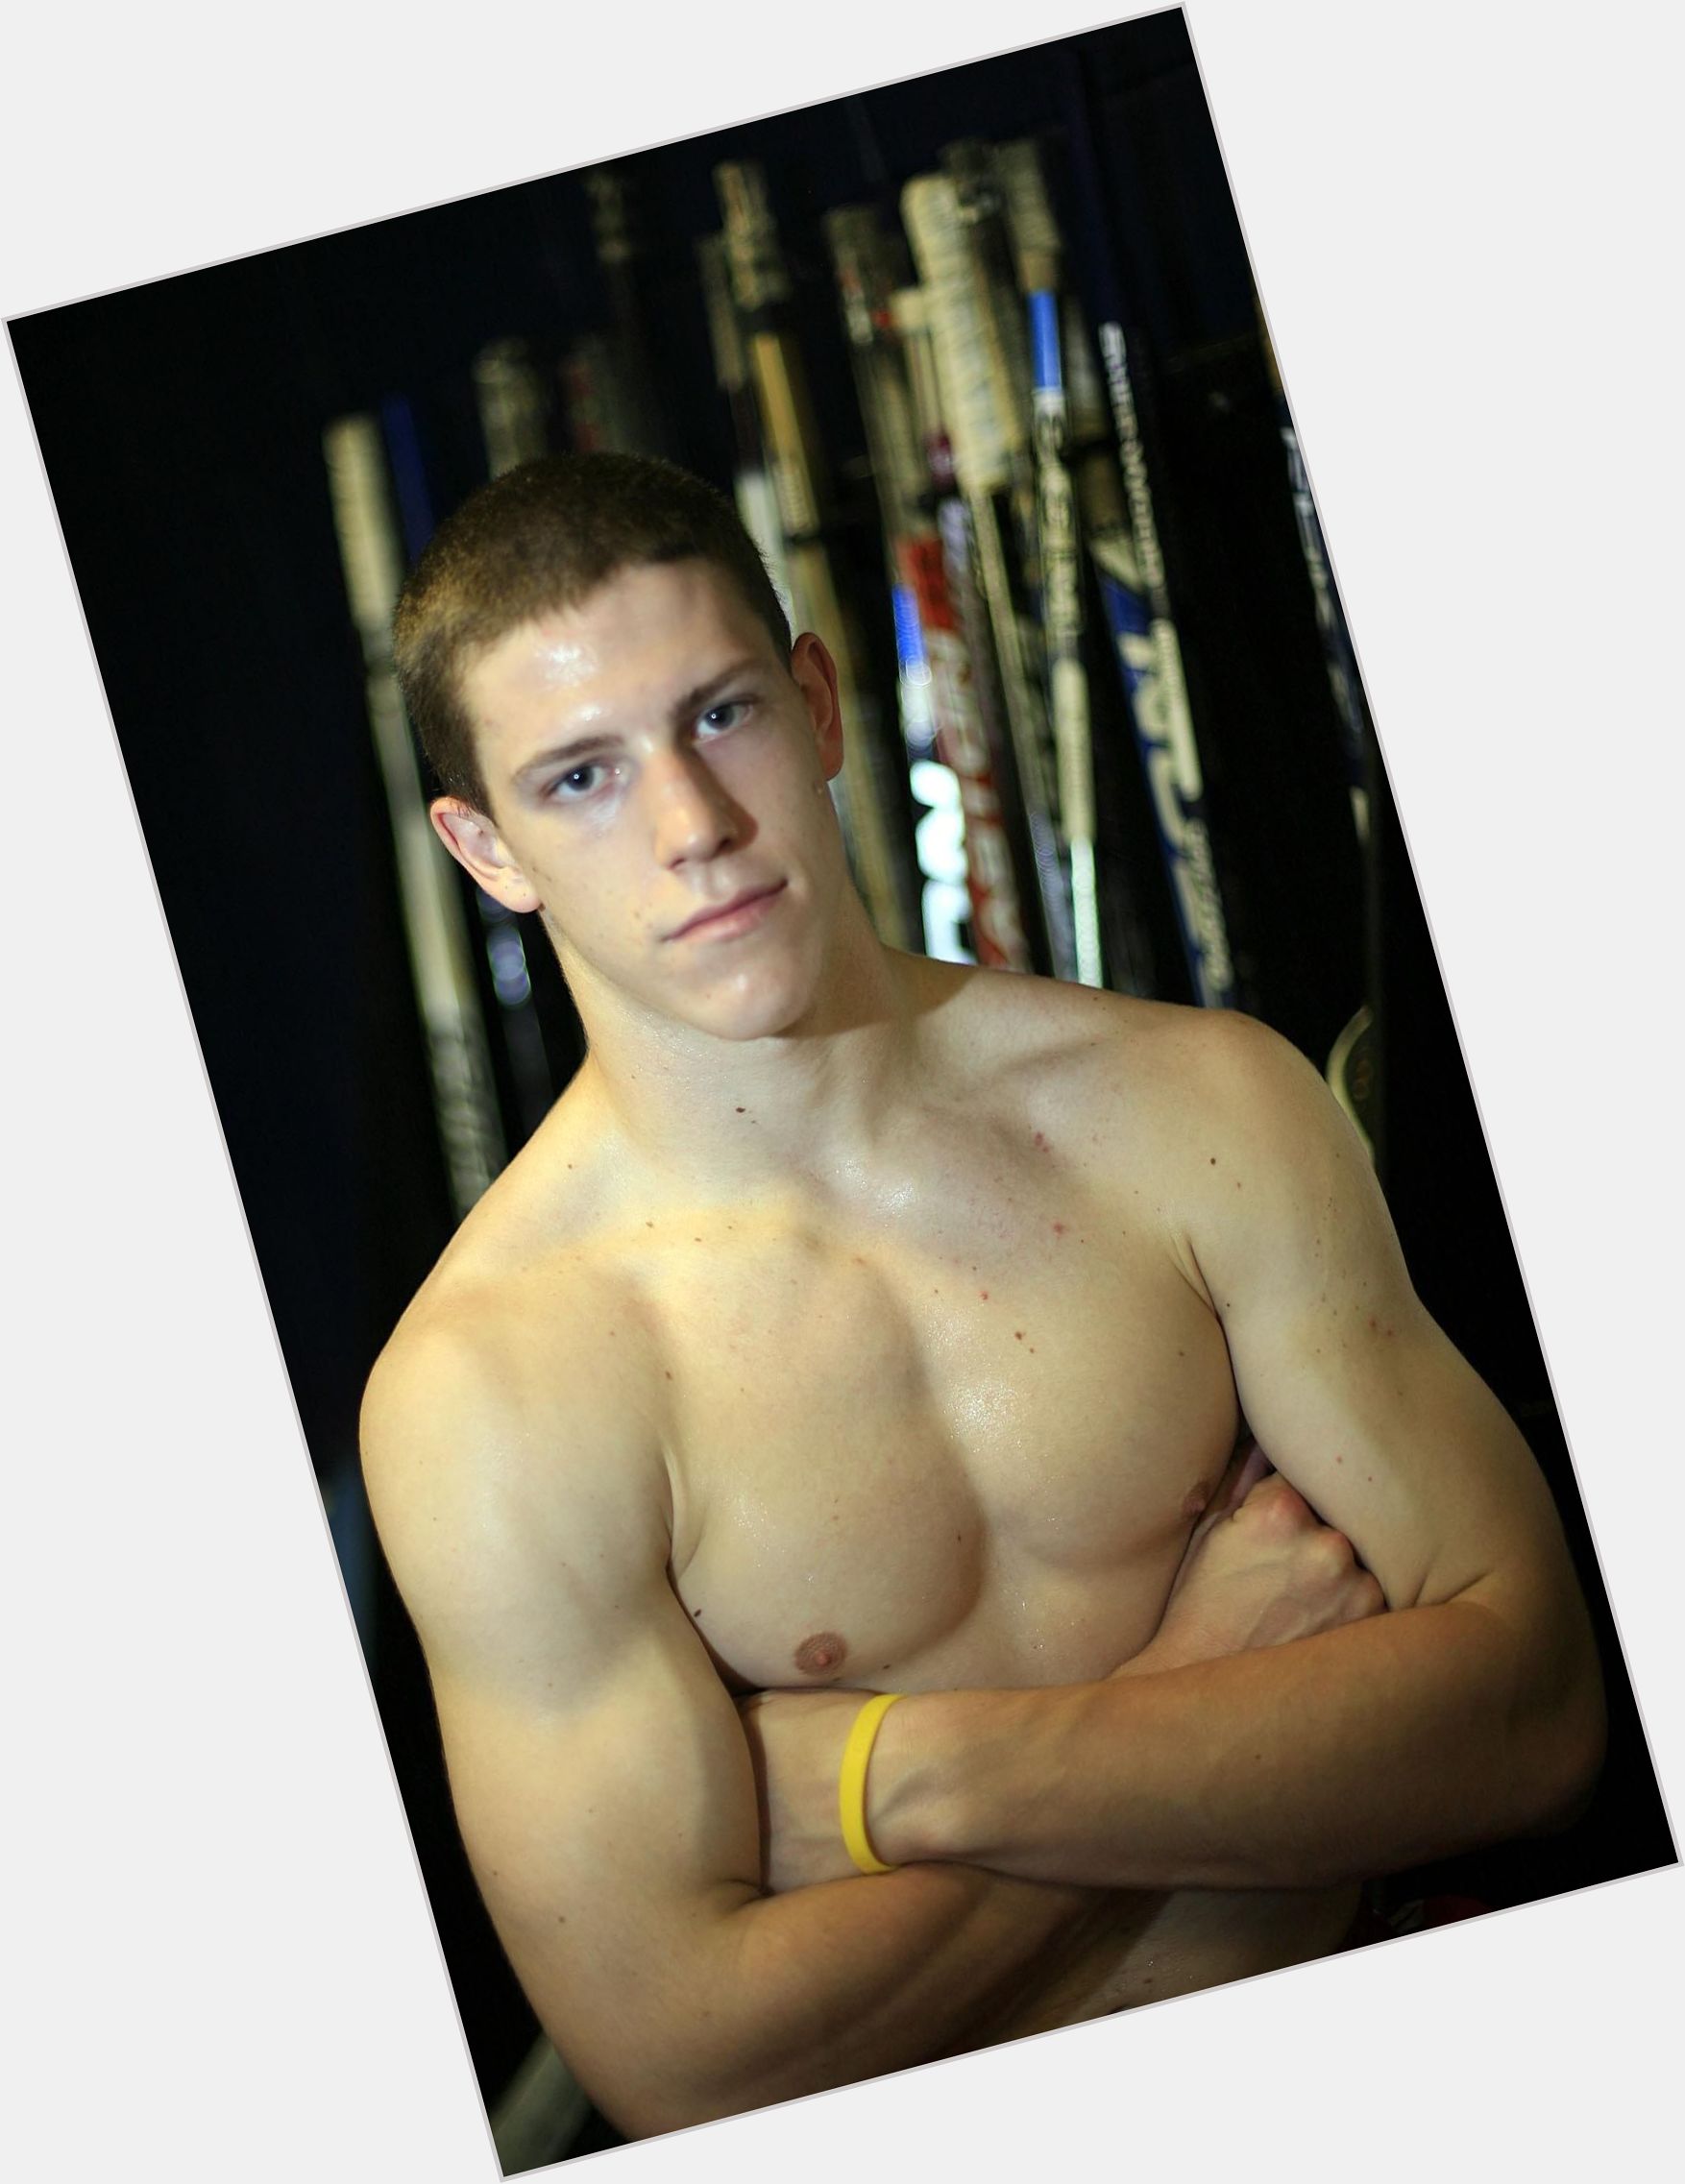 Http://fanpagepress.net/m/C/Charlie Coyle Dating 2